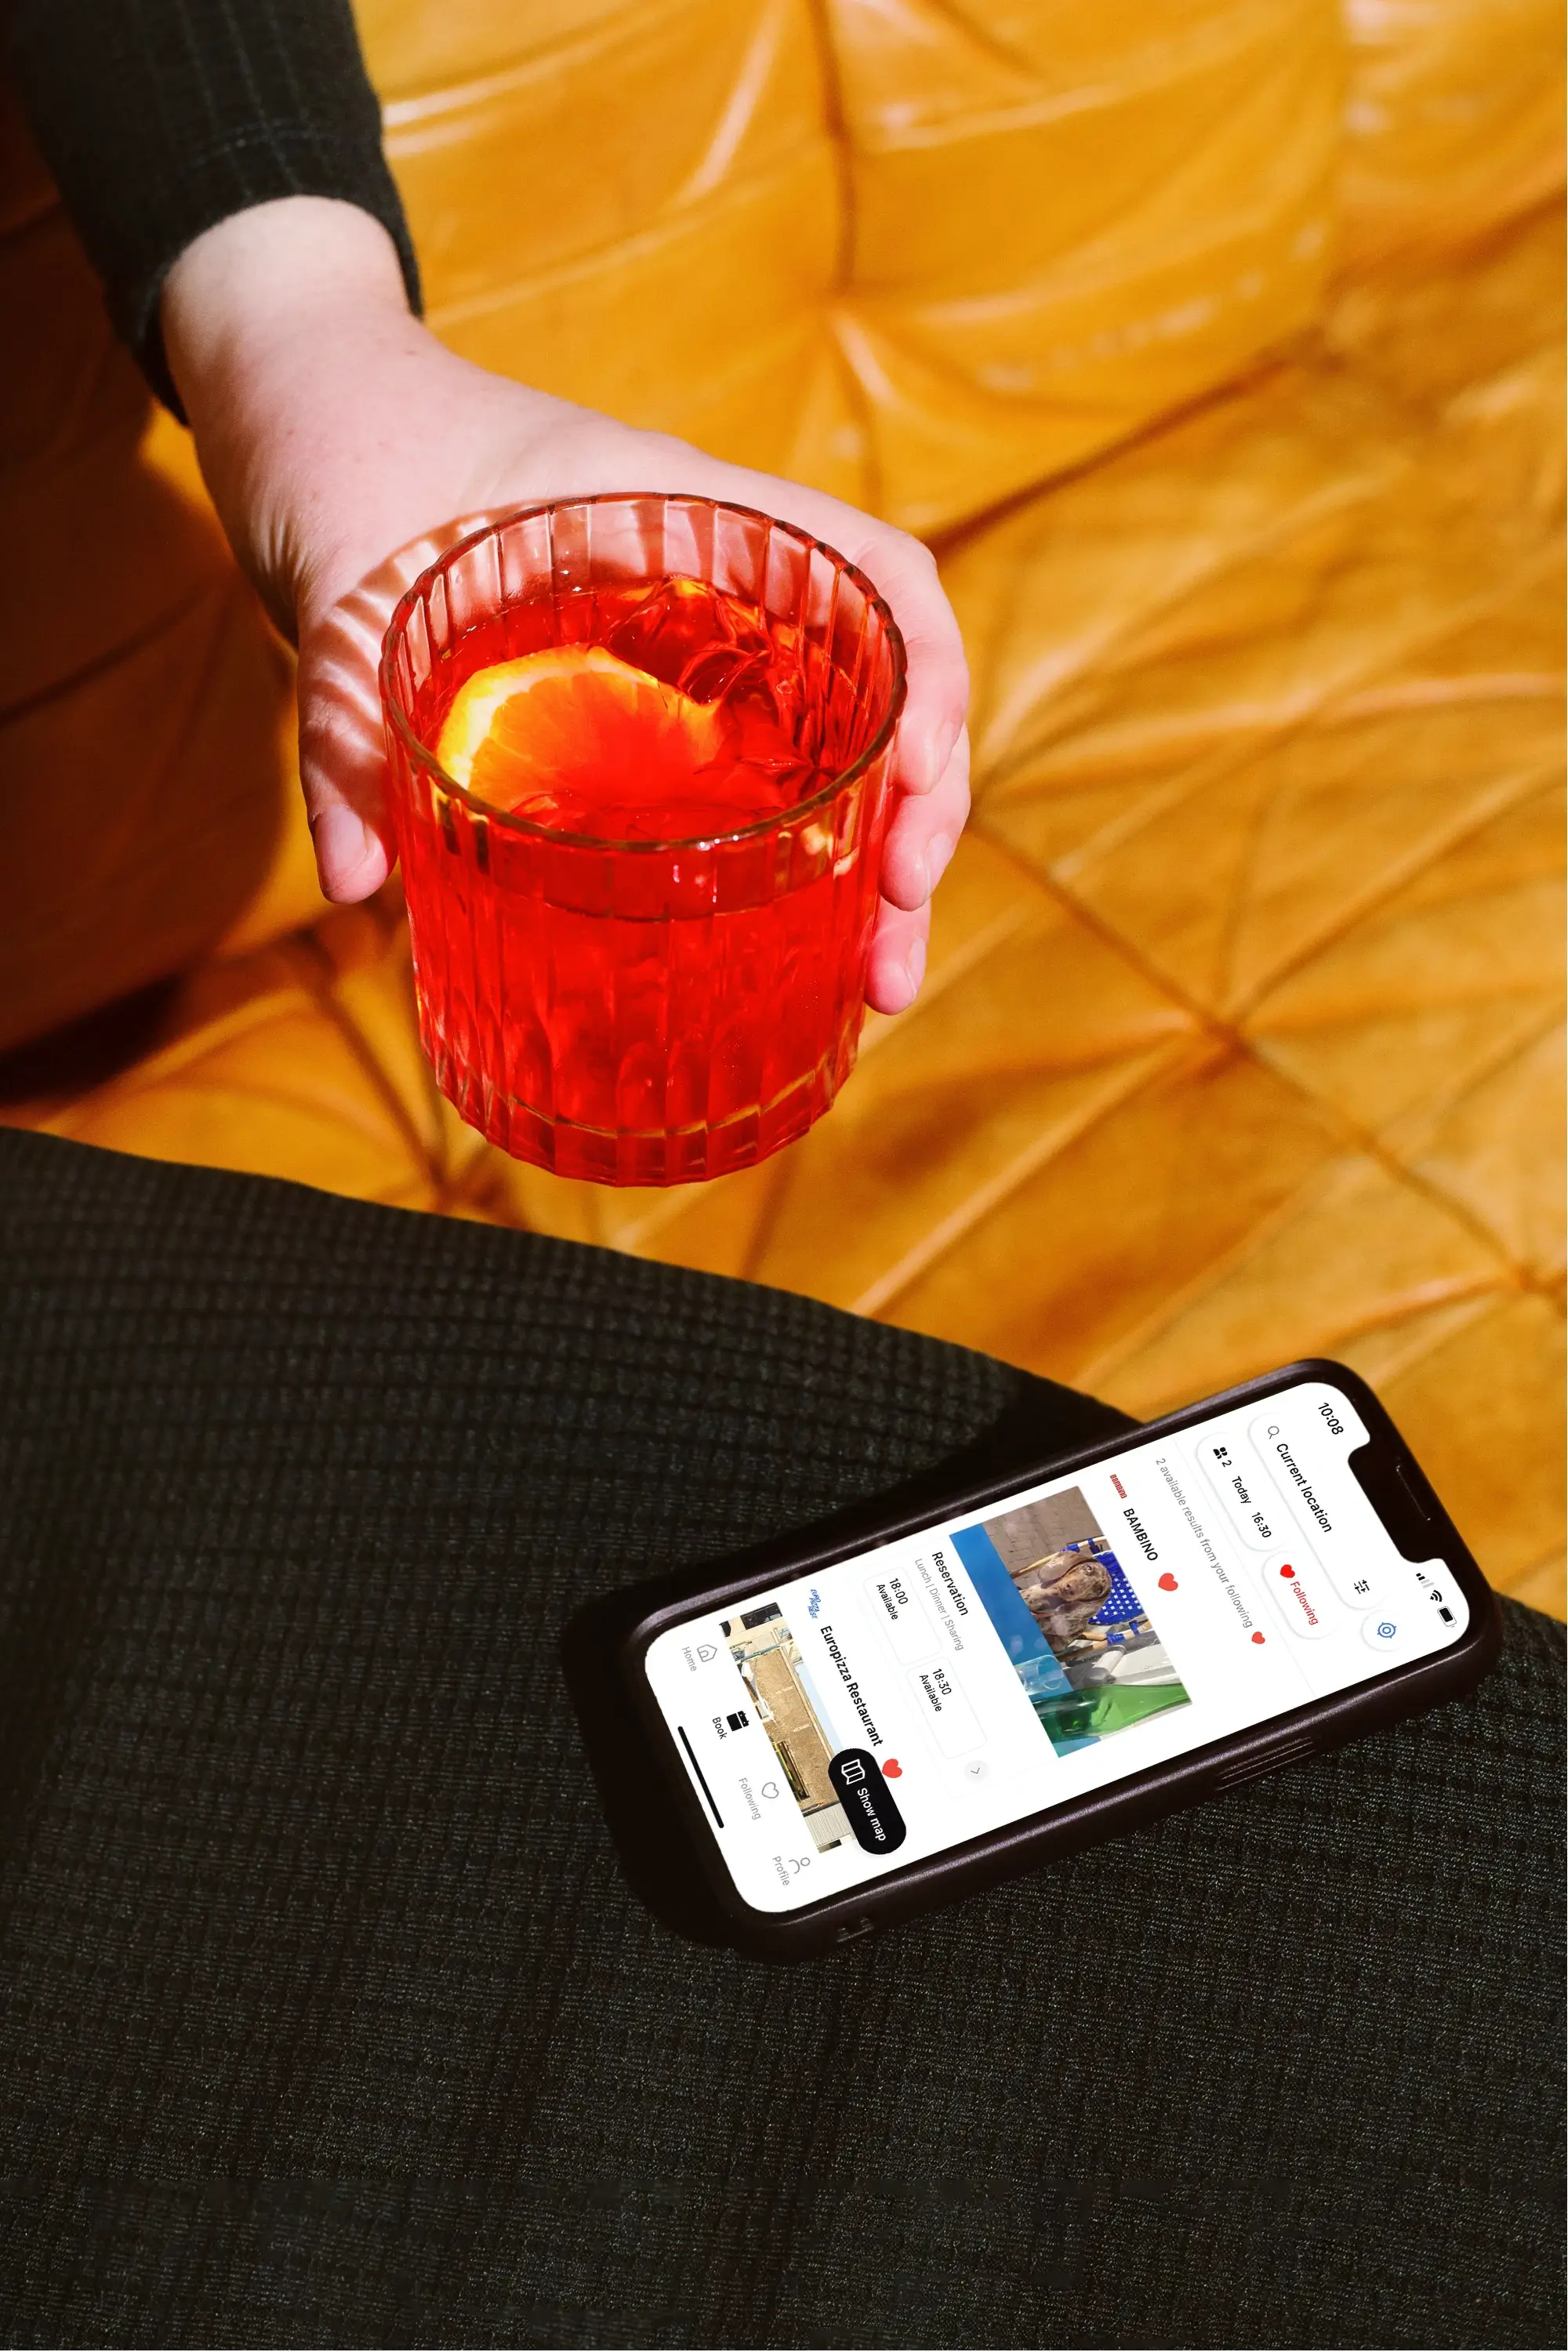 Making a booking with the Table app on iPhone with a drink in hand